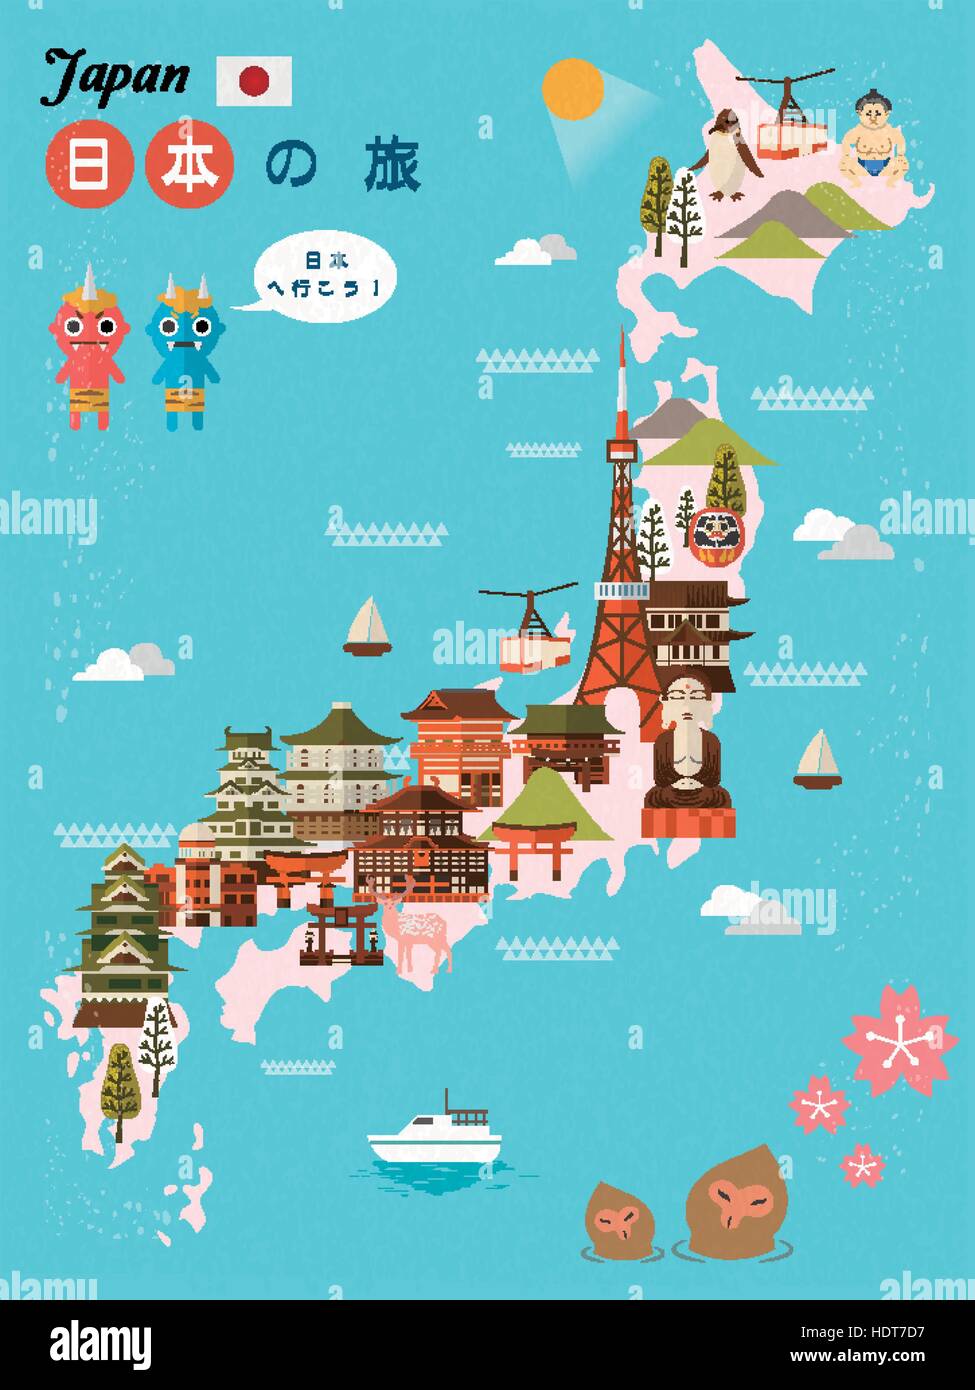 lovely Japan travel poster with attractions - Japan Travel in Japanese ...